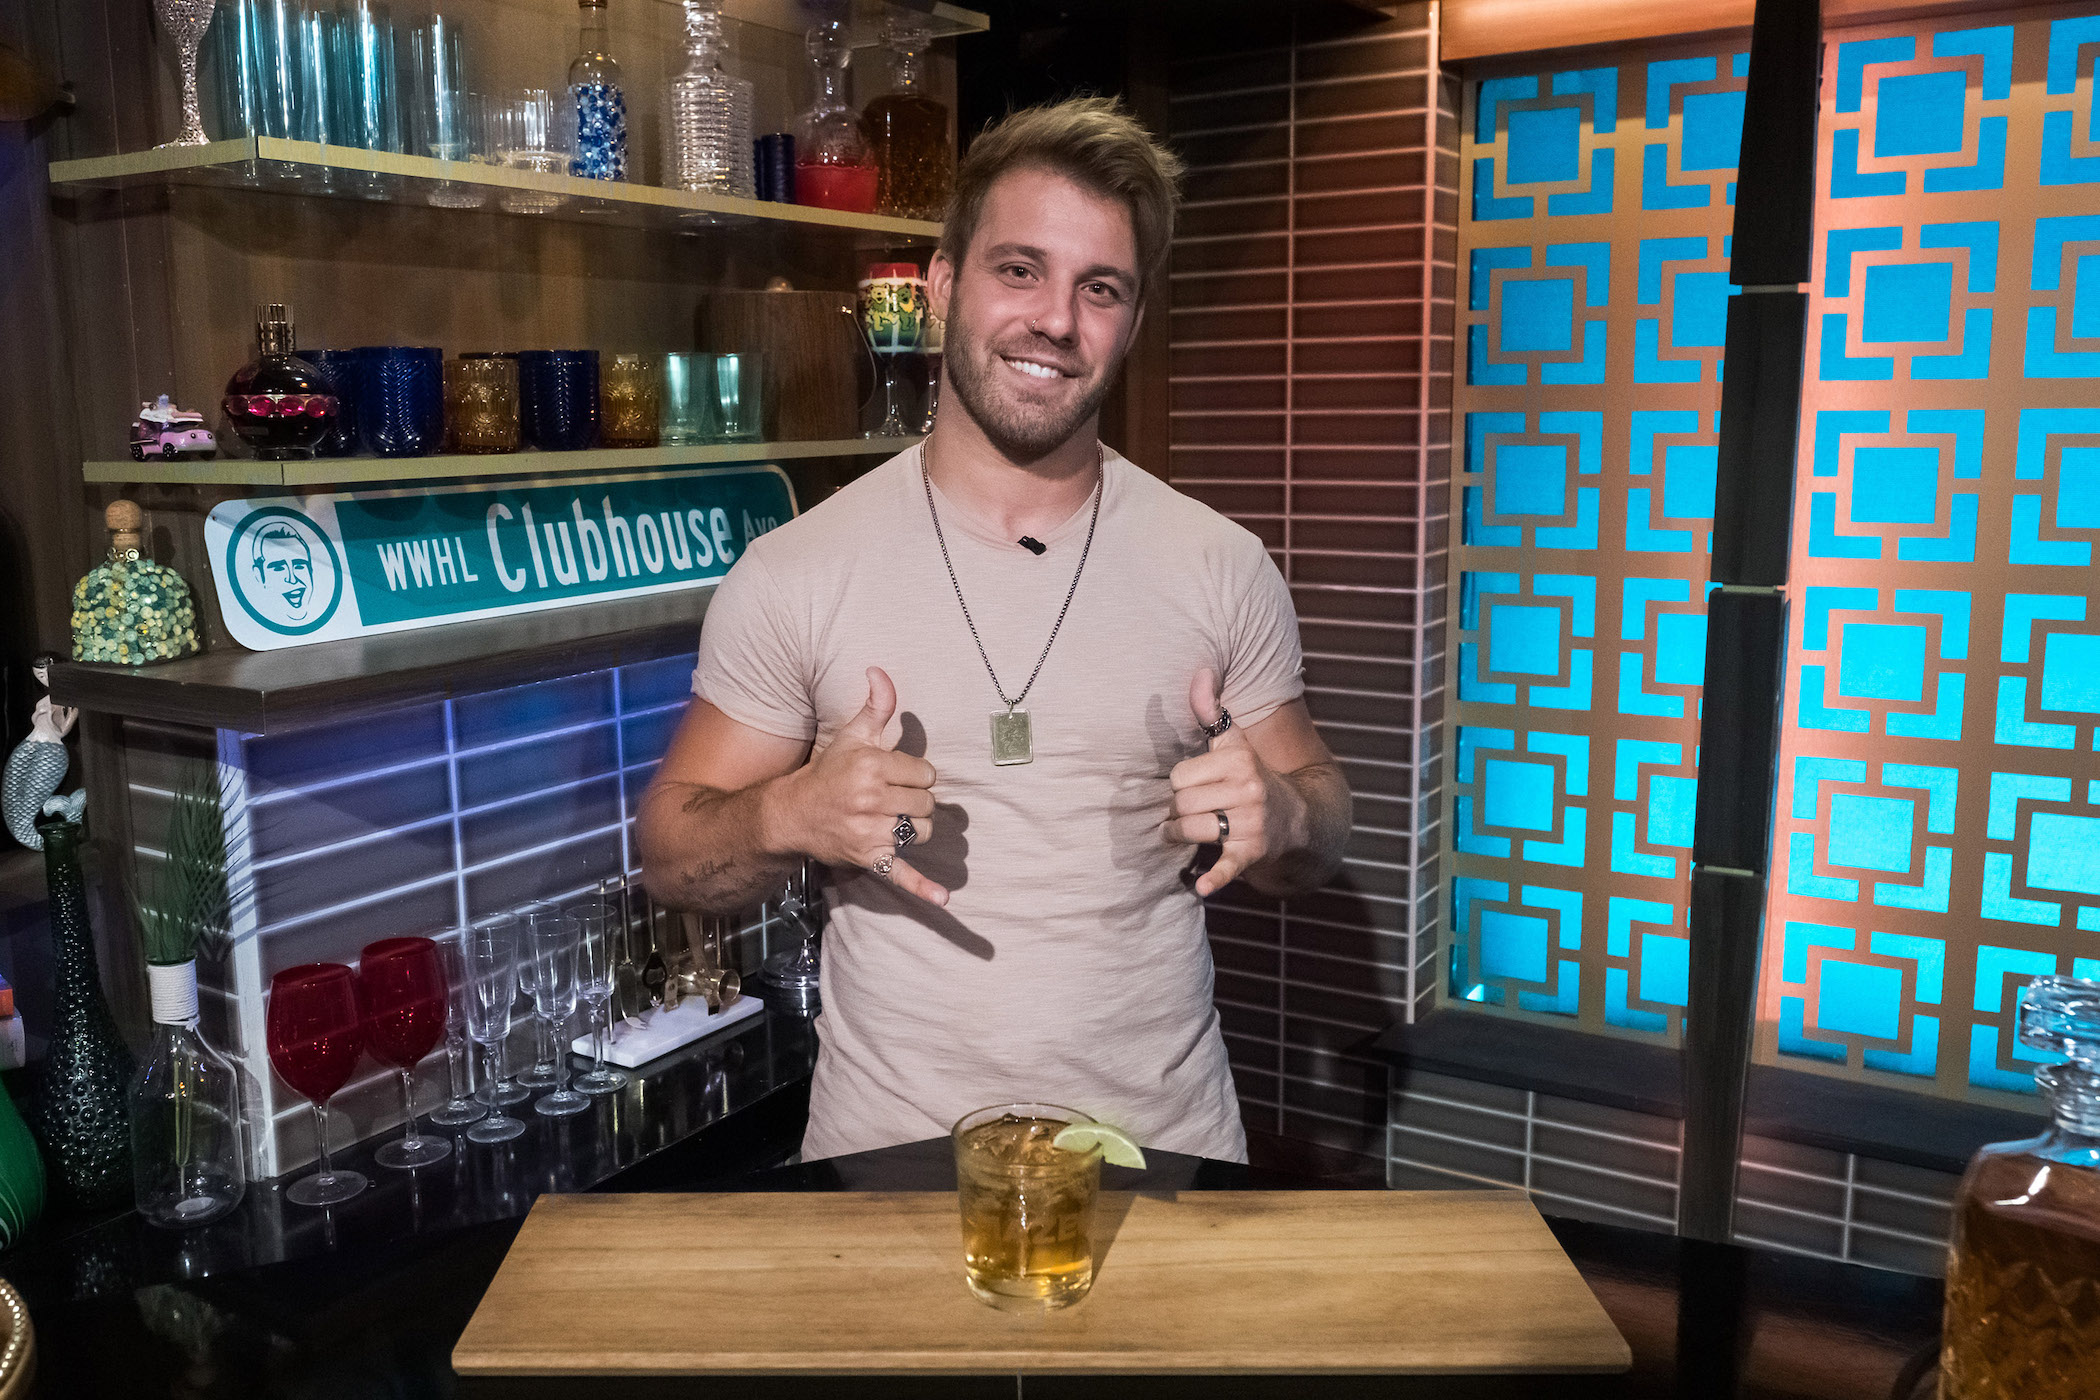 Paulie Calafiore from MTV's 'The Challenge' smiling in a kitchen on 'Watch What Happens Live'